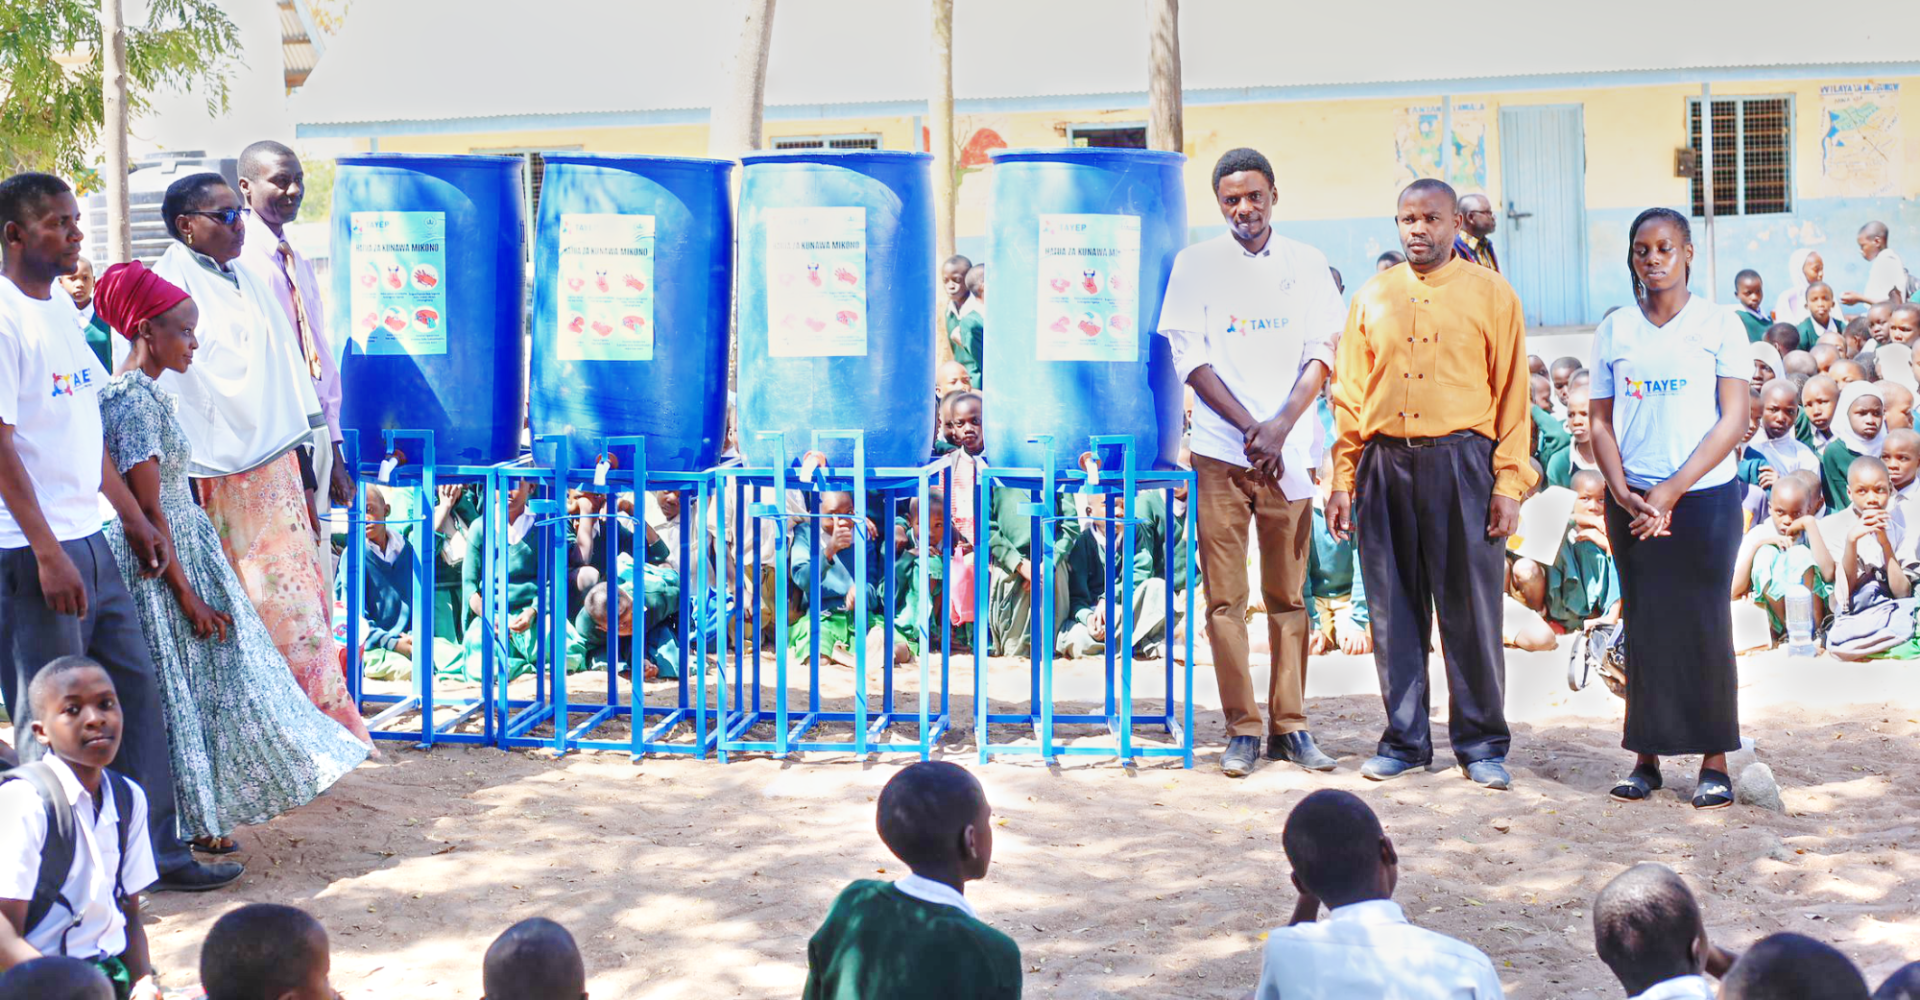 Tanzania Young Eco Protection (TAYEP) – boosting pupil’s education enrolment and performance by lowering the risk of poor hygiene related diseases​